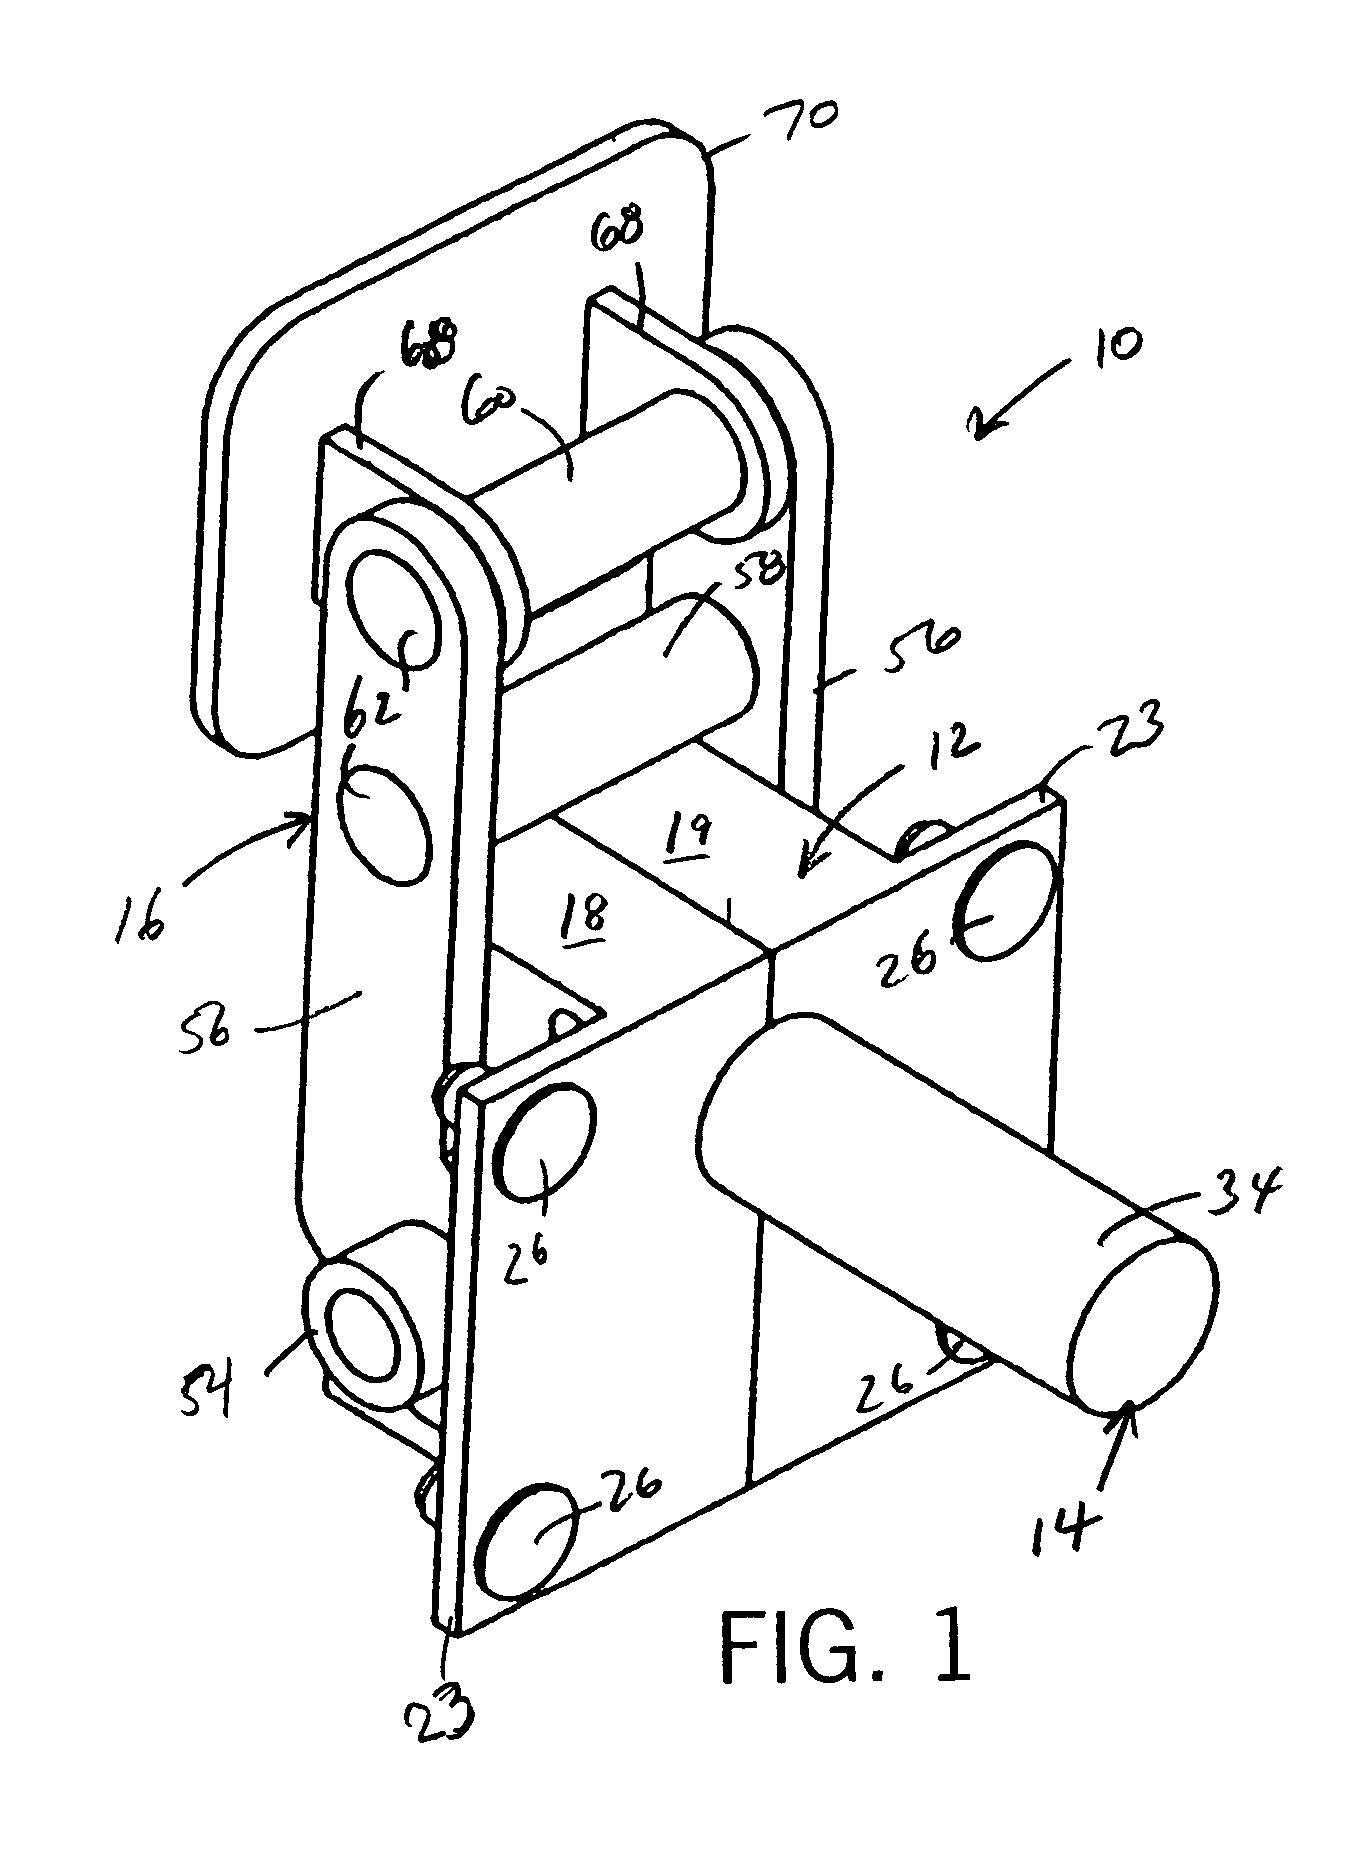 Travel lock for vehicle slide-out